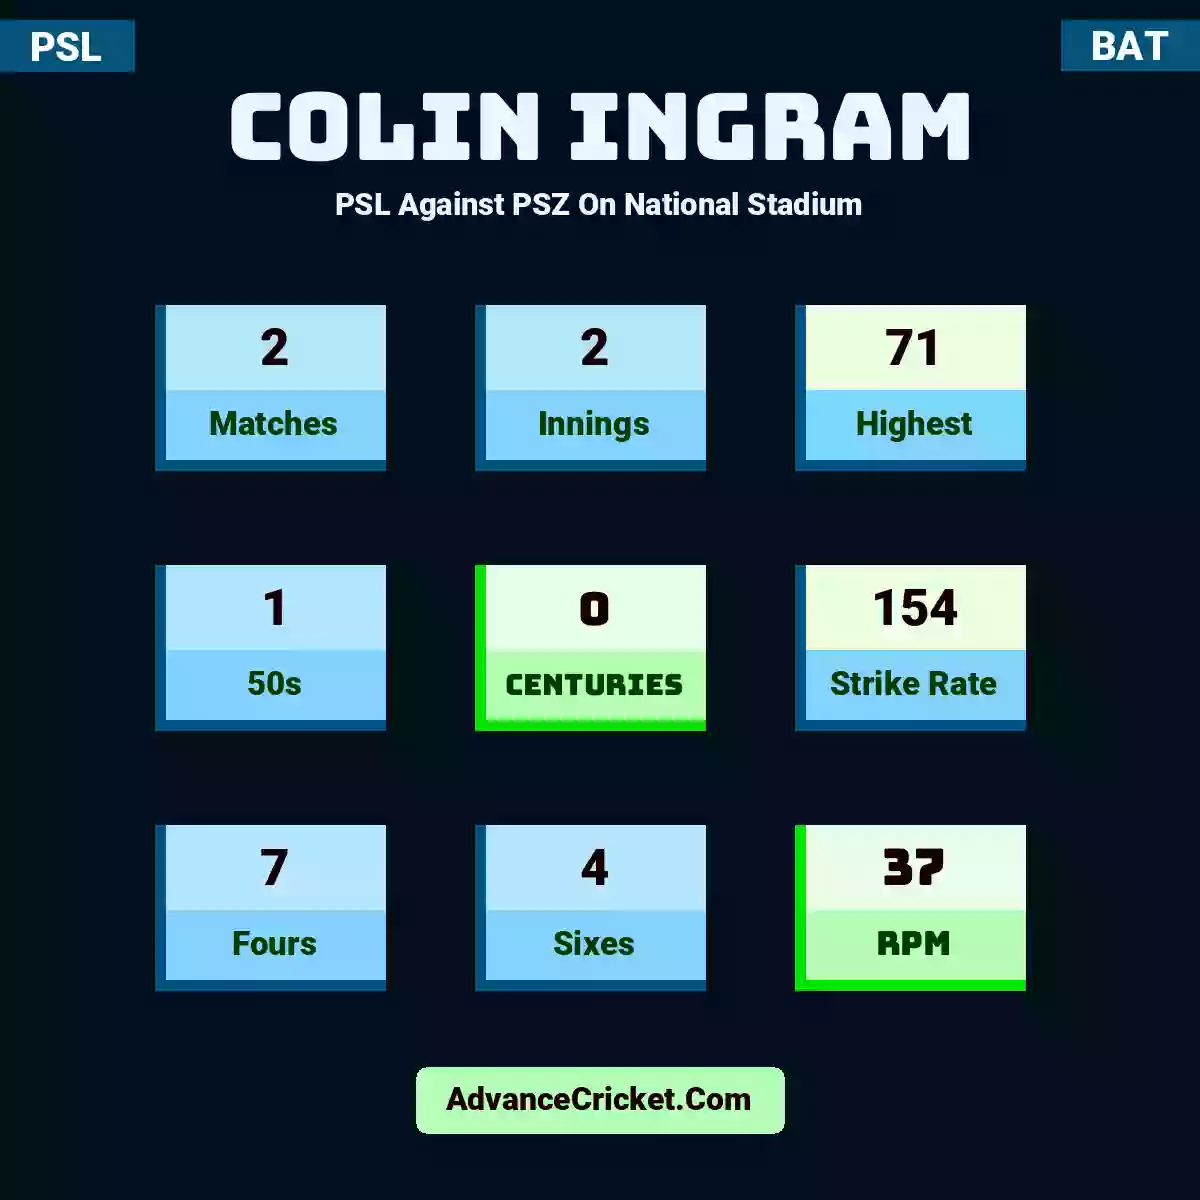 Colin Ingram PSL  Against PSZ On National Stadium, Colin Ingram played 2 matches, scored 71 runs as highest, 1 half-centuries, and 0 centuries, with a strike rate of 154. C.Ingram hit 7 fours and 4 sixes, with an RPM of 37.